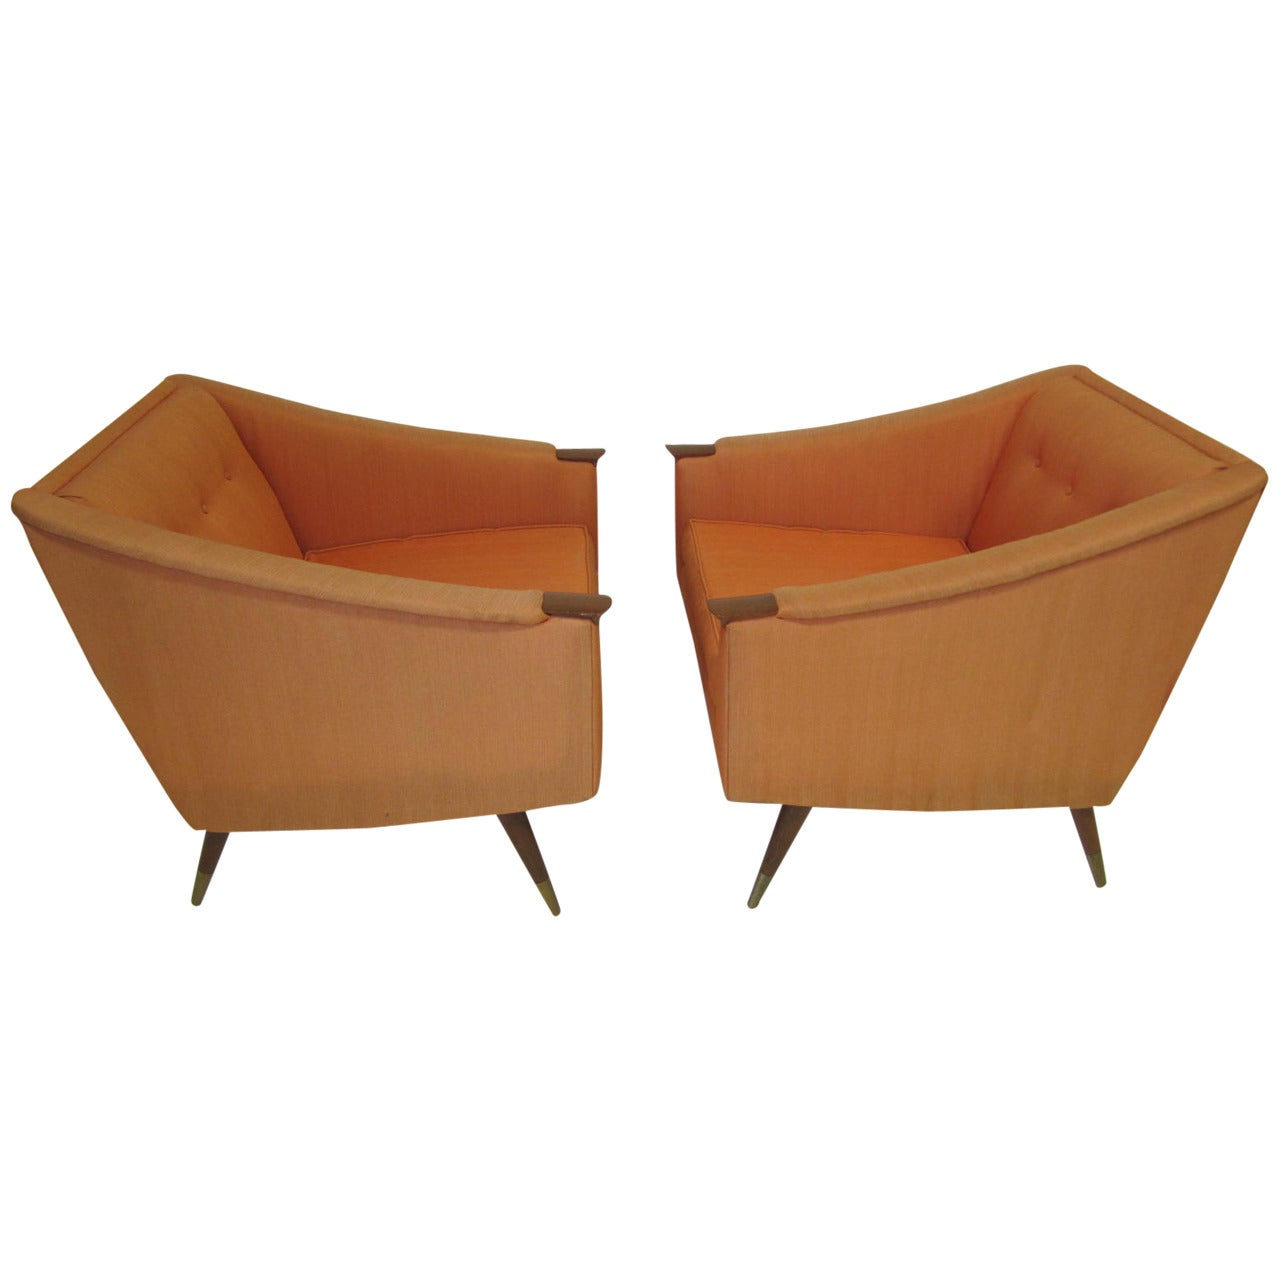 Unusual Pair of Signed Karpen Boxy Lounge Chairs, Mid-Century Modern For Sale